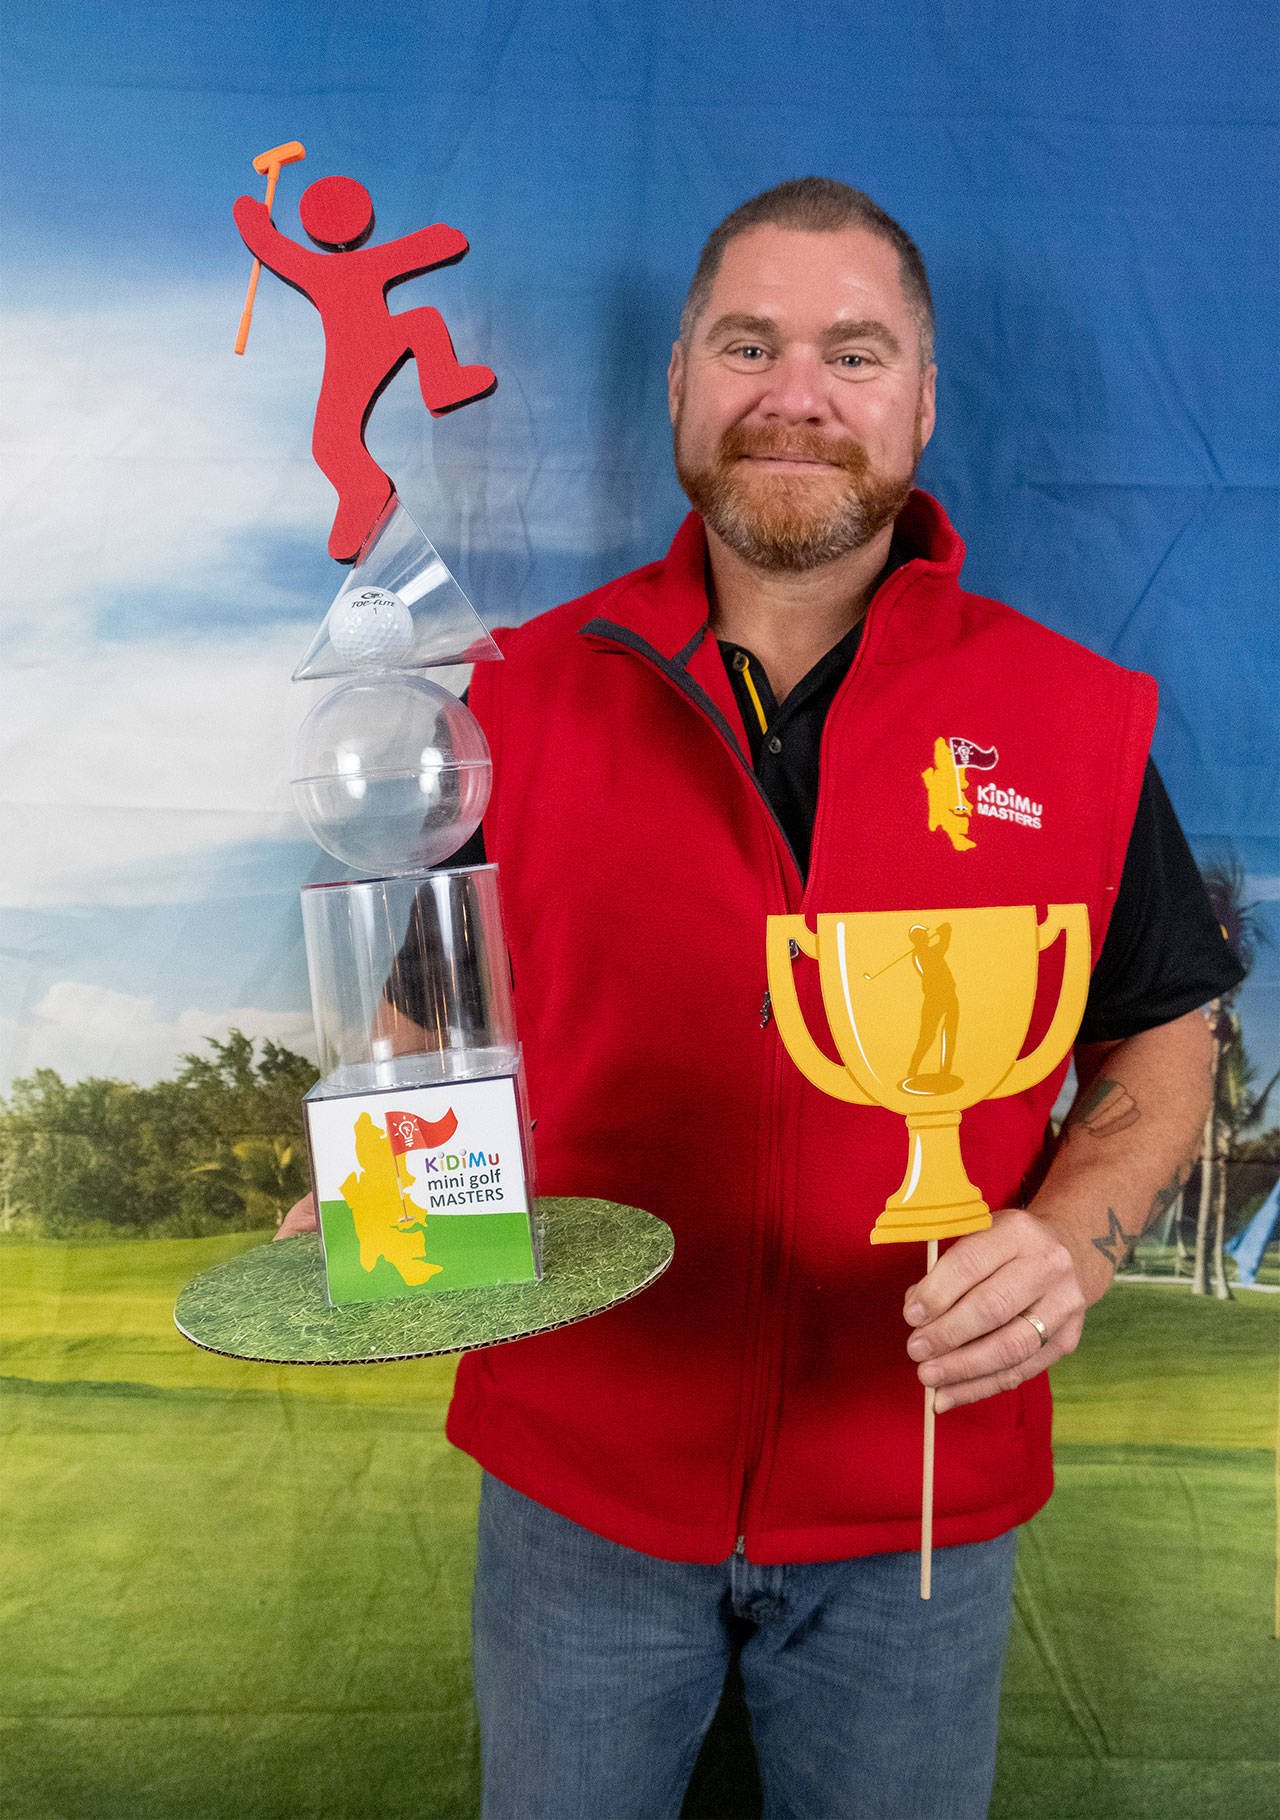 Sparkson Photography / Jennifer Jones photo | Shawn Carter earned the title of this year’s Kids Discovery Museum Masters Champion at the nonprofit’s third annual miniature golf tournament fundraiser.